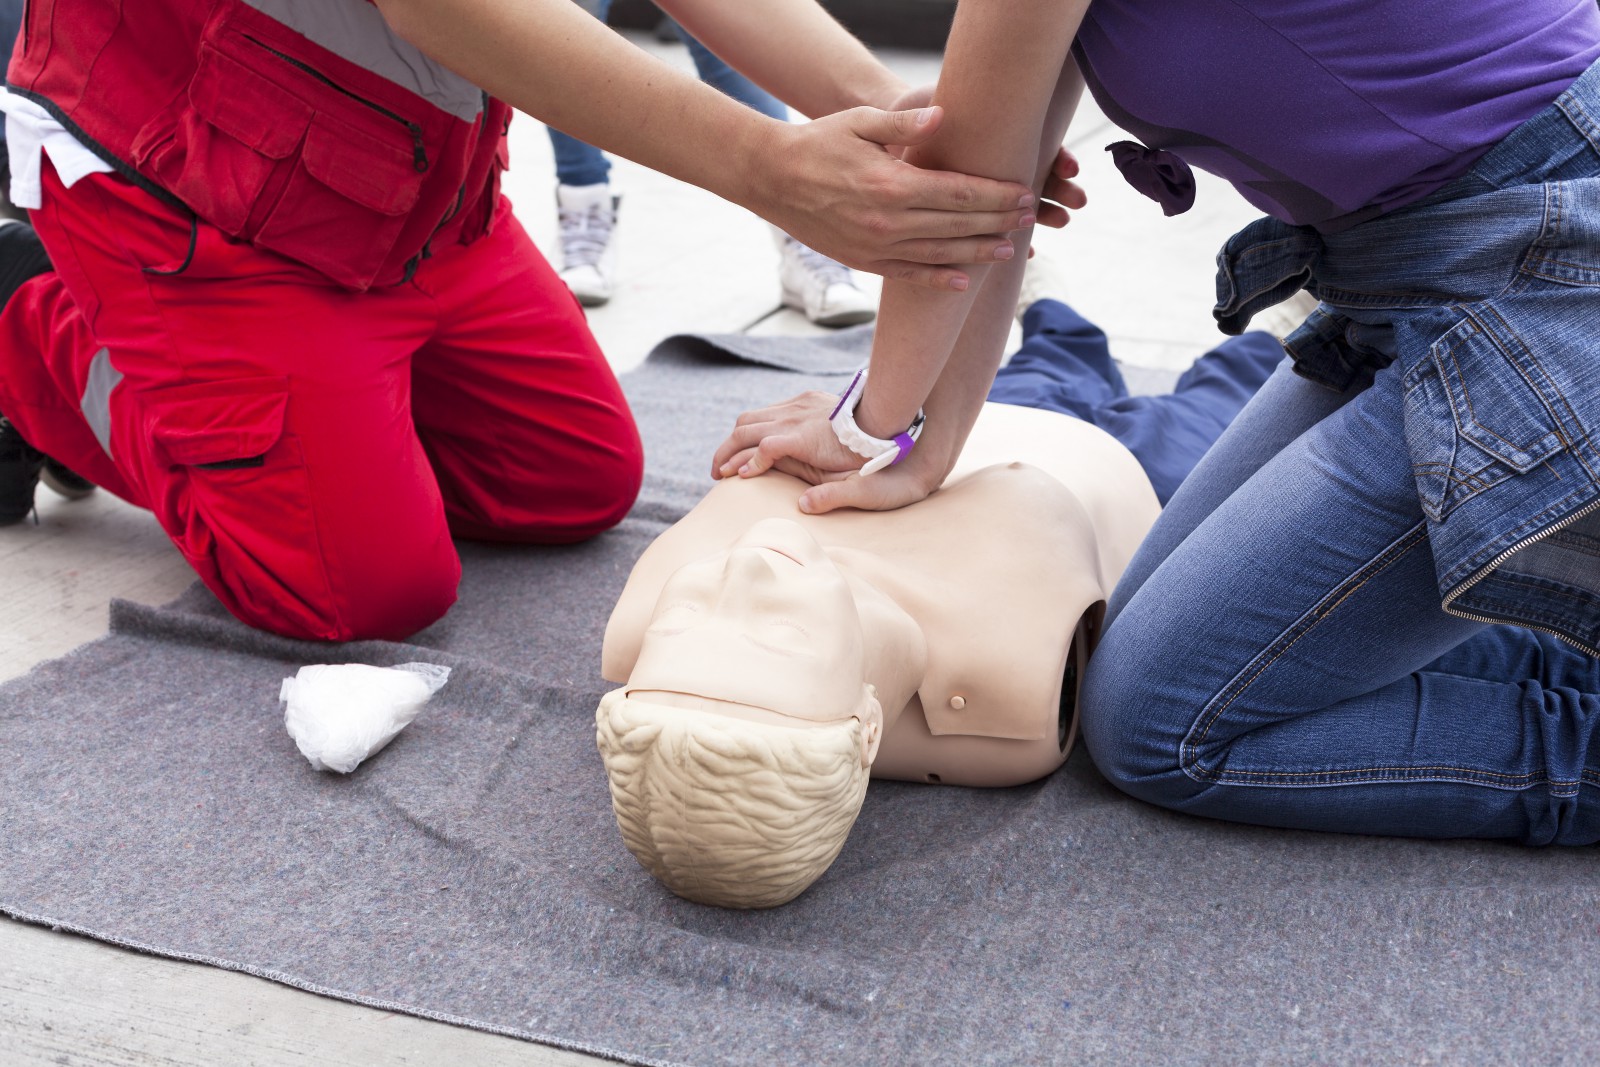 Emergency First Aid & CPR/AED Course